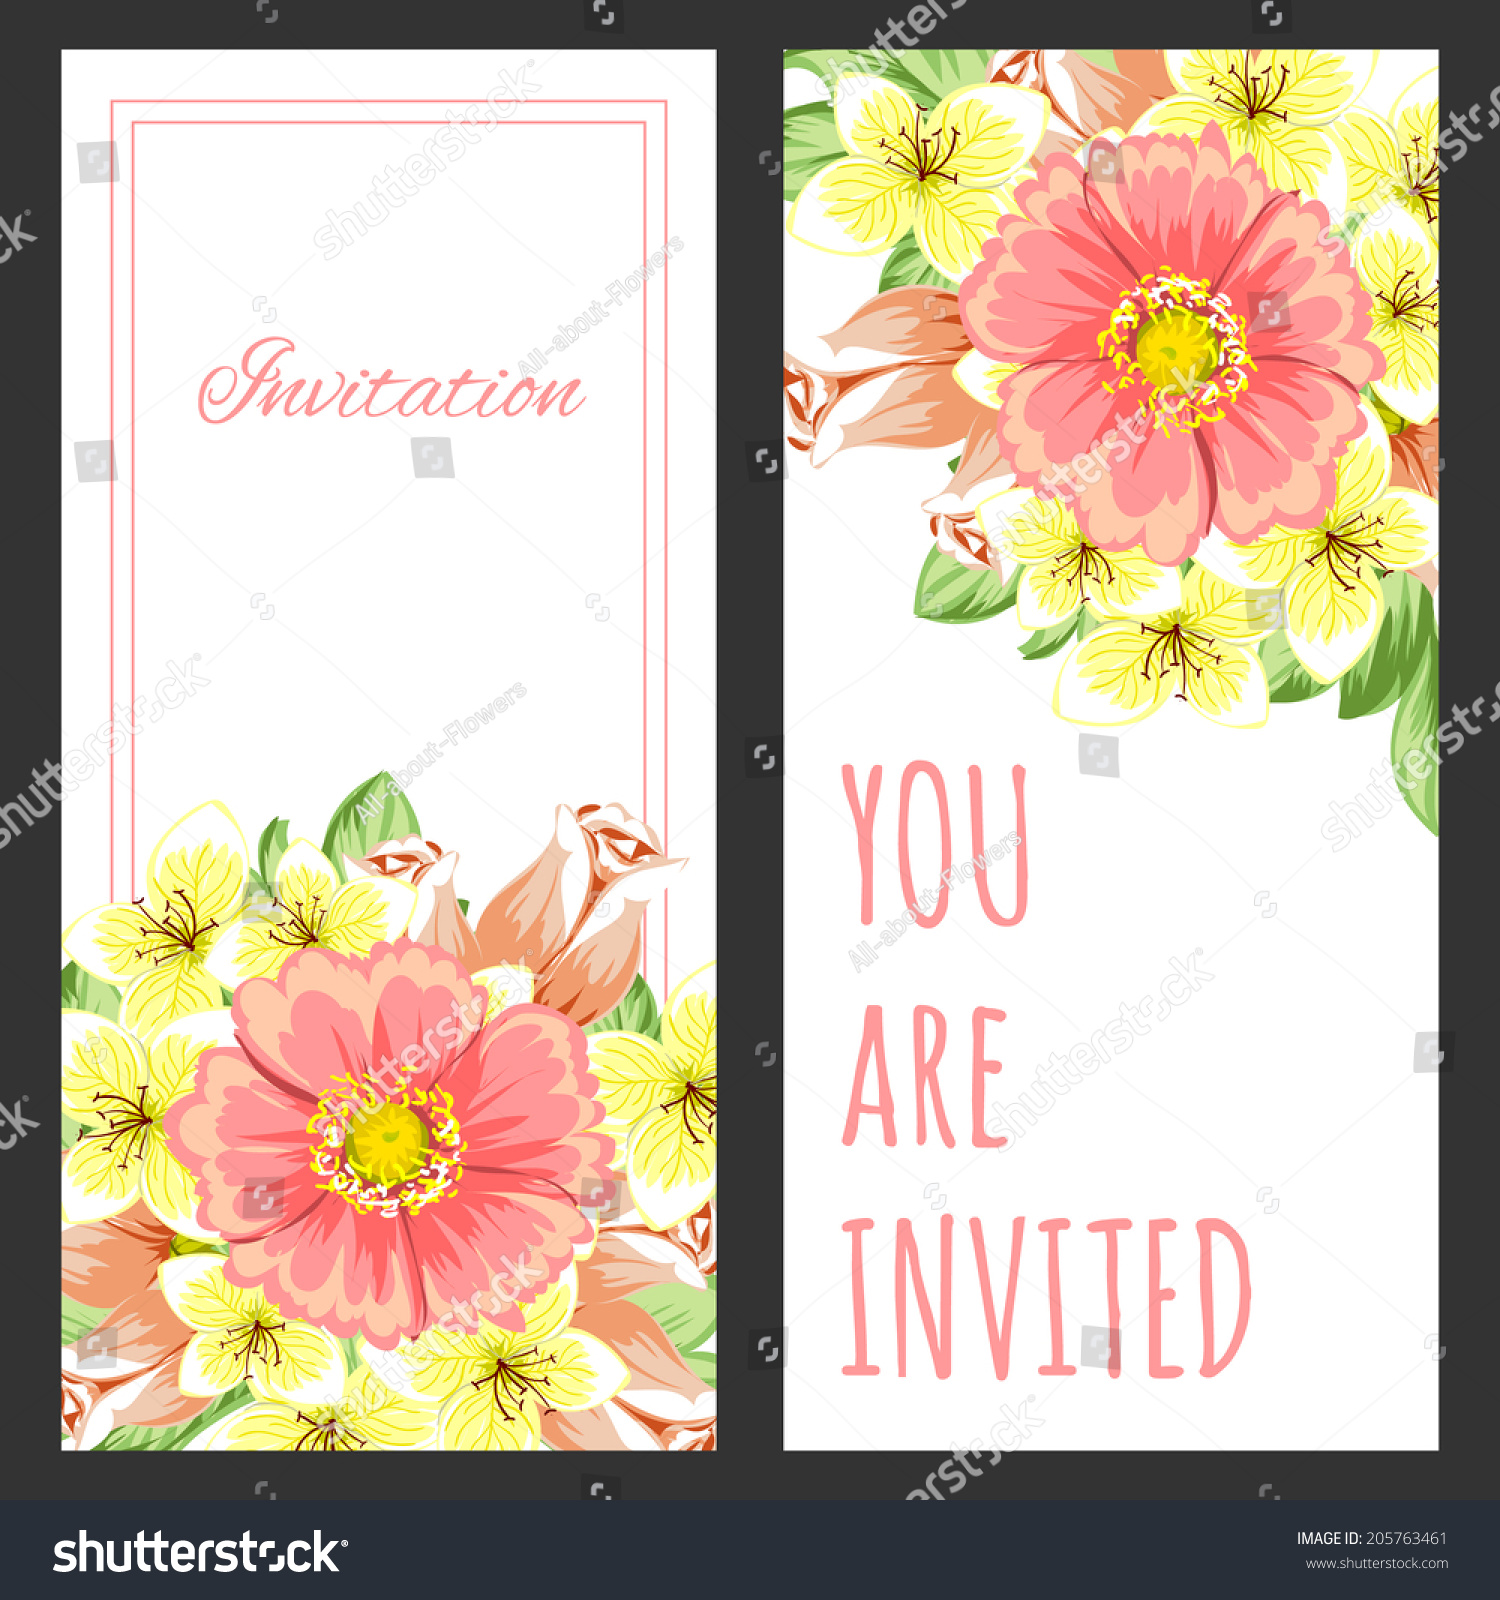 Set of invitations with floral background #205763461